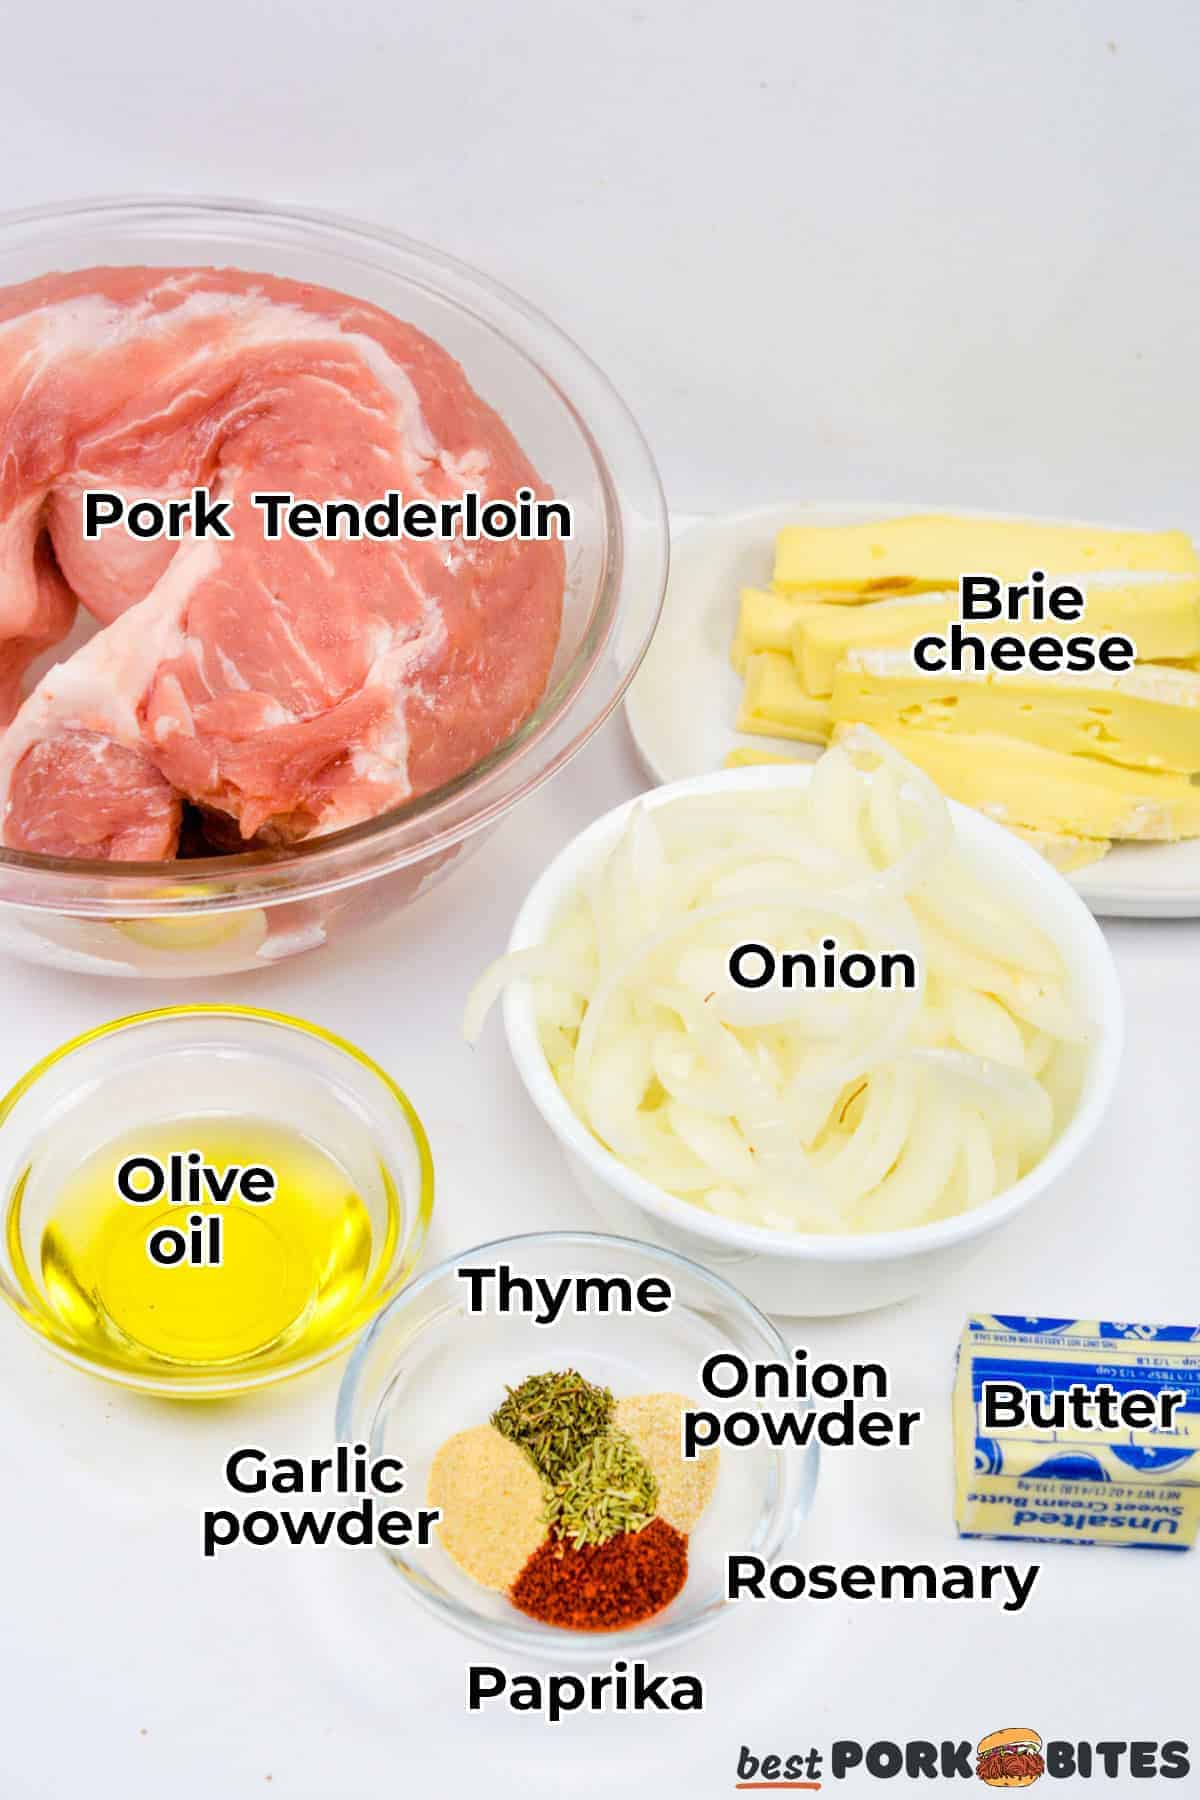 all the ingredients for stuffed pork tenderloin in separate bowls on a white counter